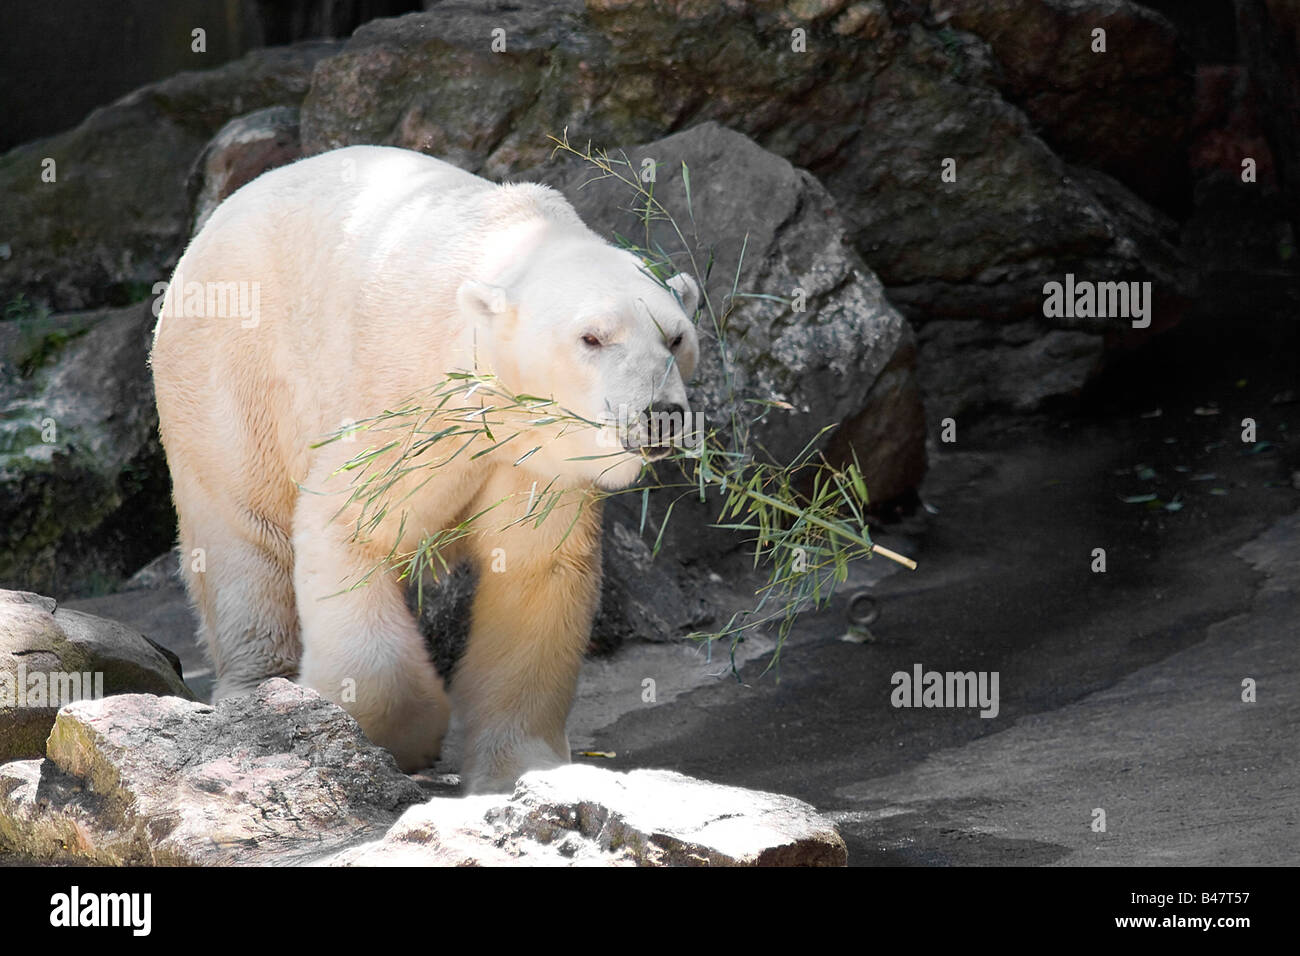 A polar bear carrying a branch in his mouth Stock Photo